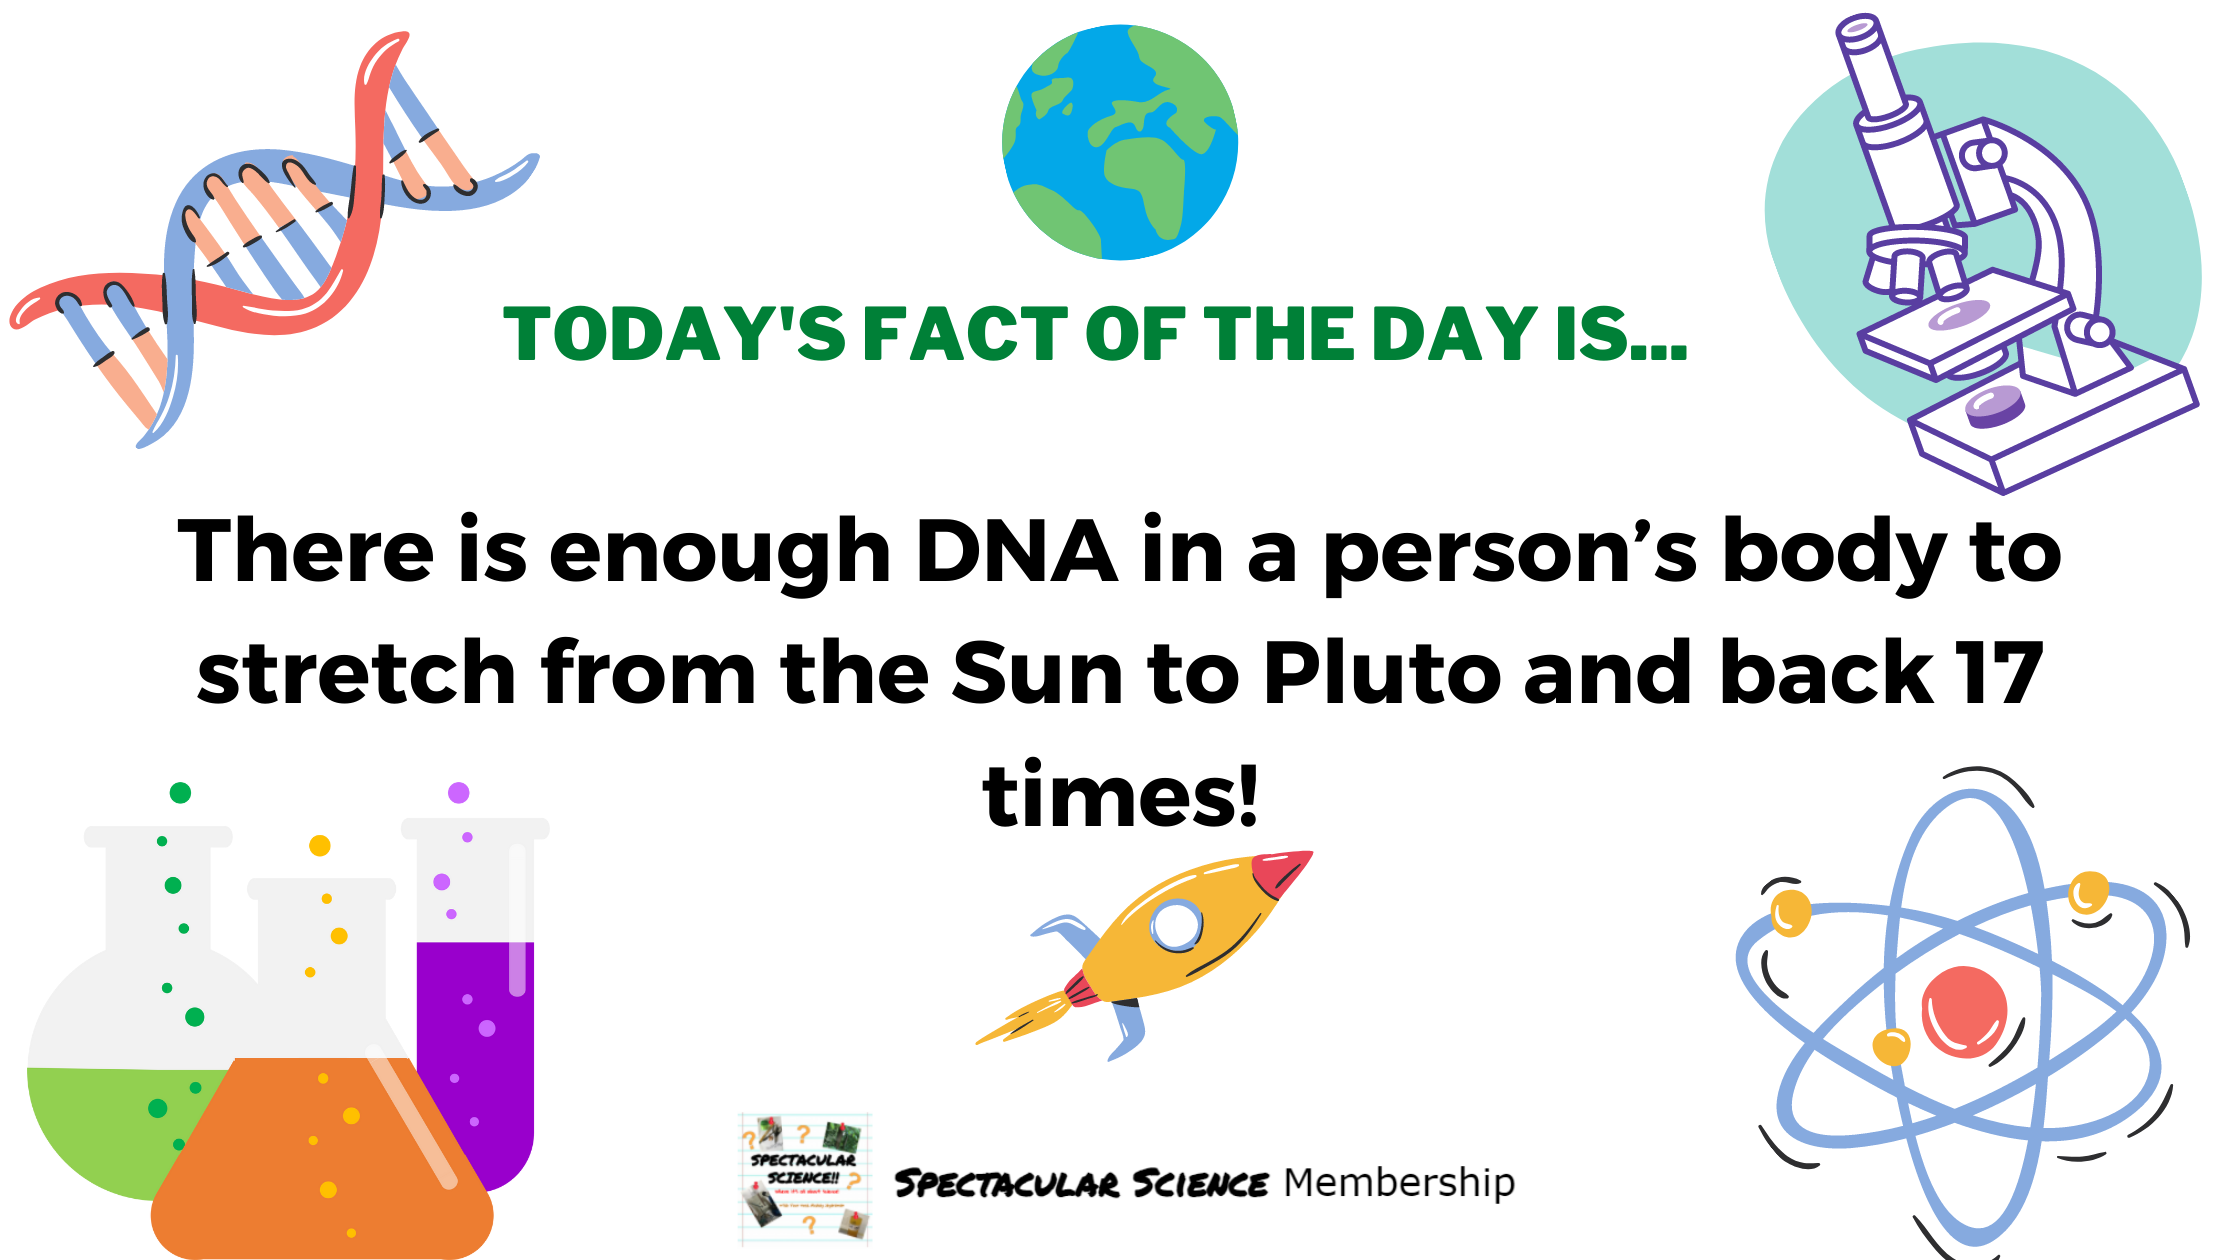 Fact of the Day Image Nov. 15th